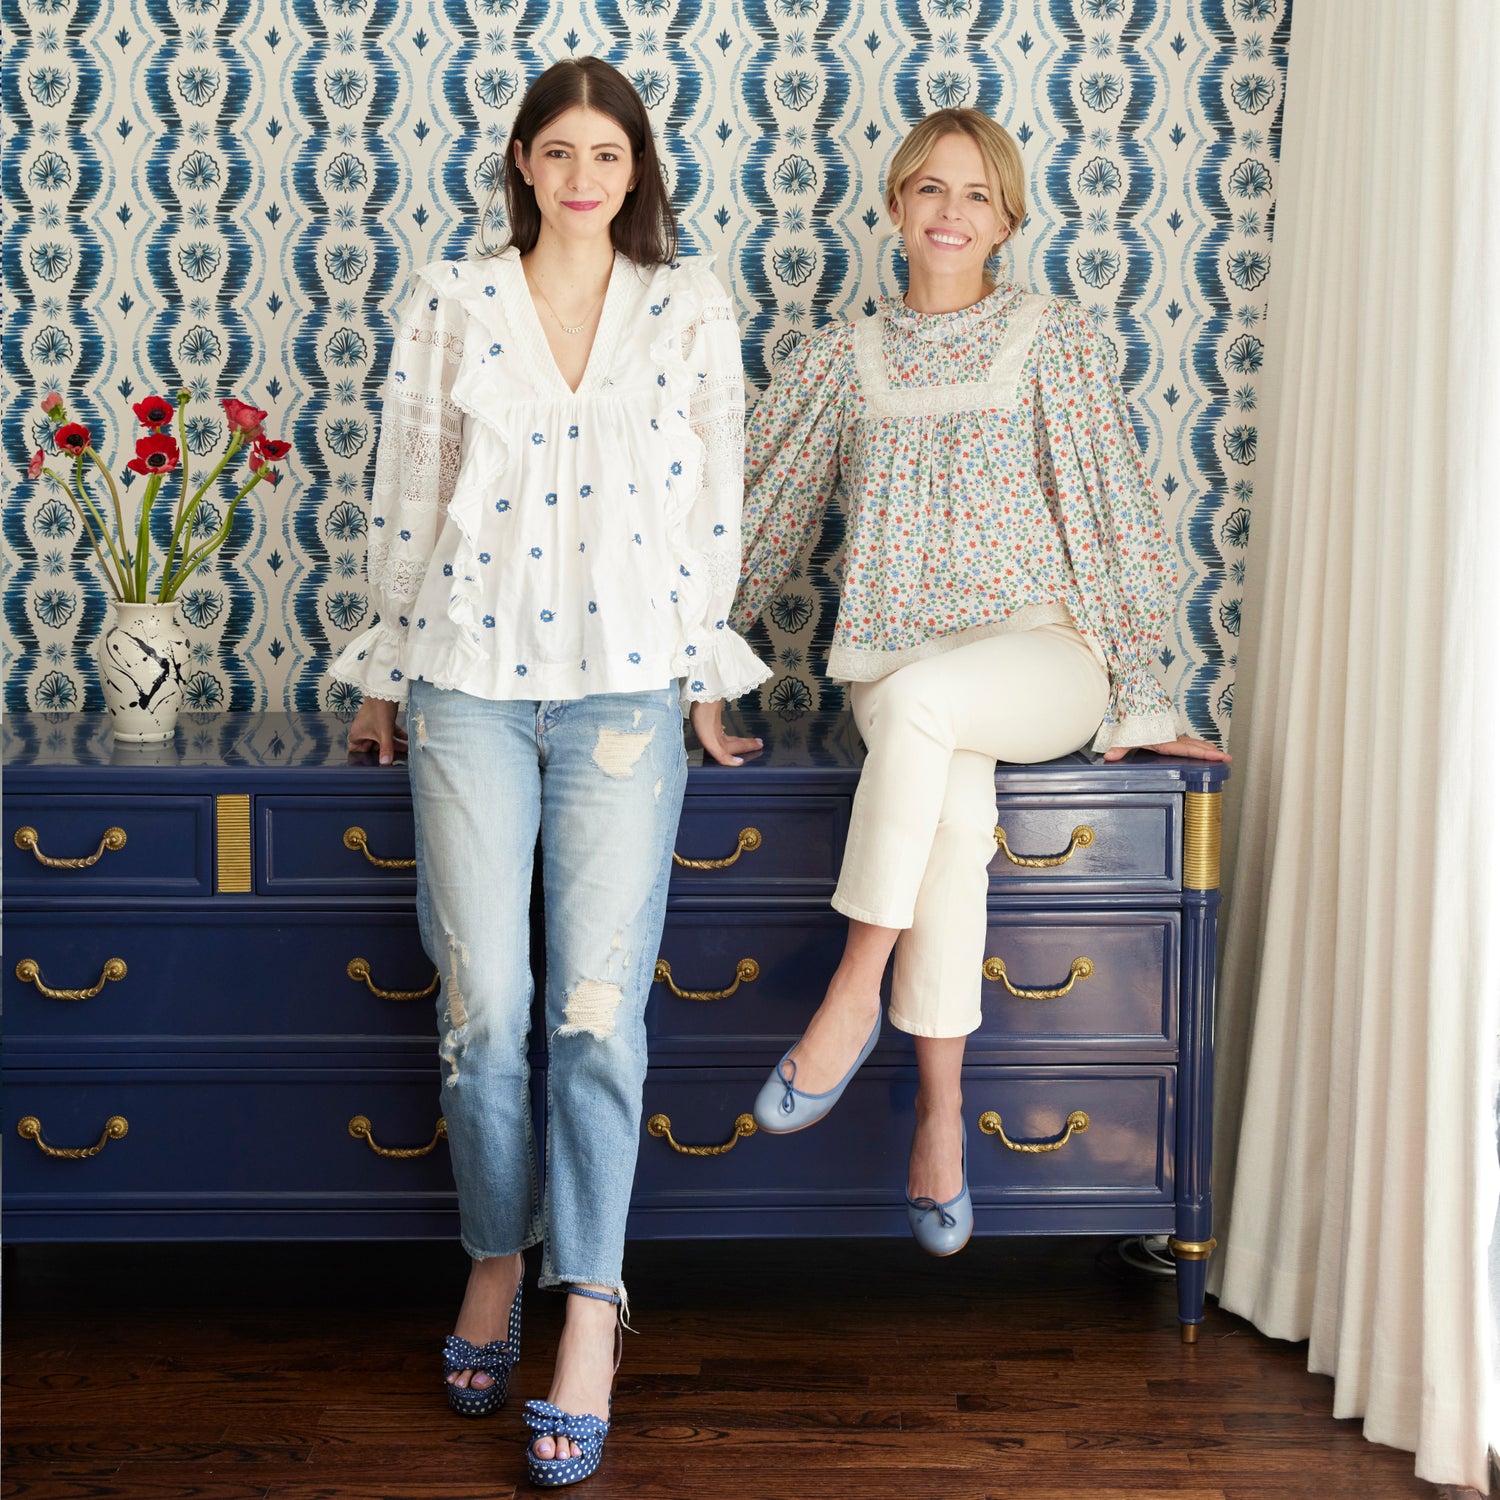 Pepper Home's Founders, Kelsey and Erin, on top of a blue dresser with flower vase in front of Blue Ikat Striped Pattern Wallpaper and white curtains on the far left